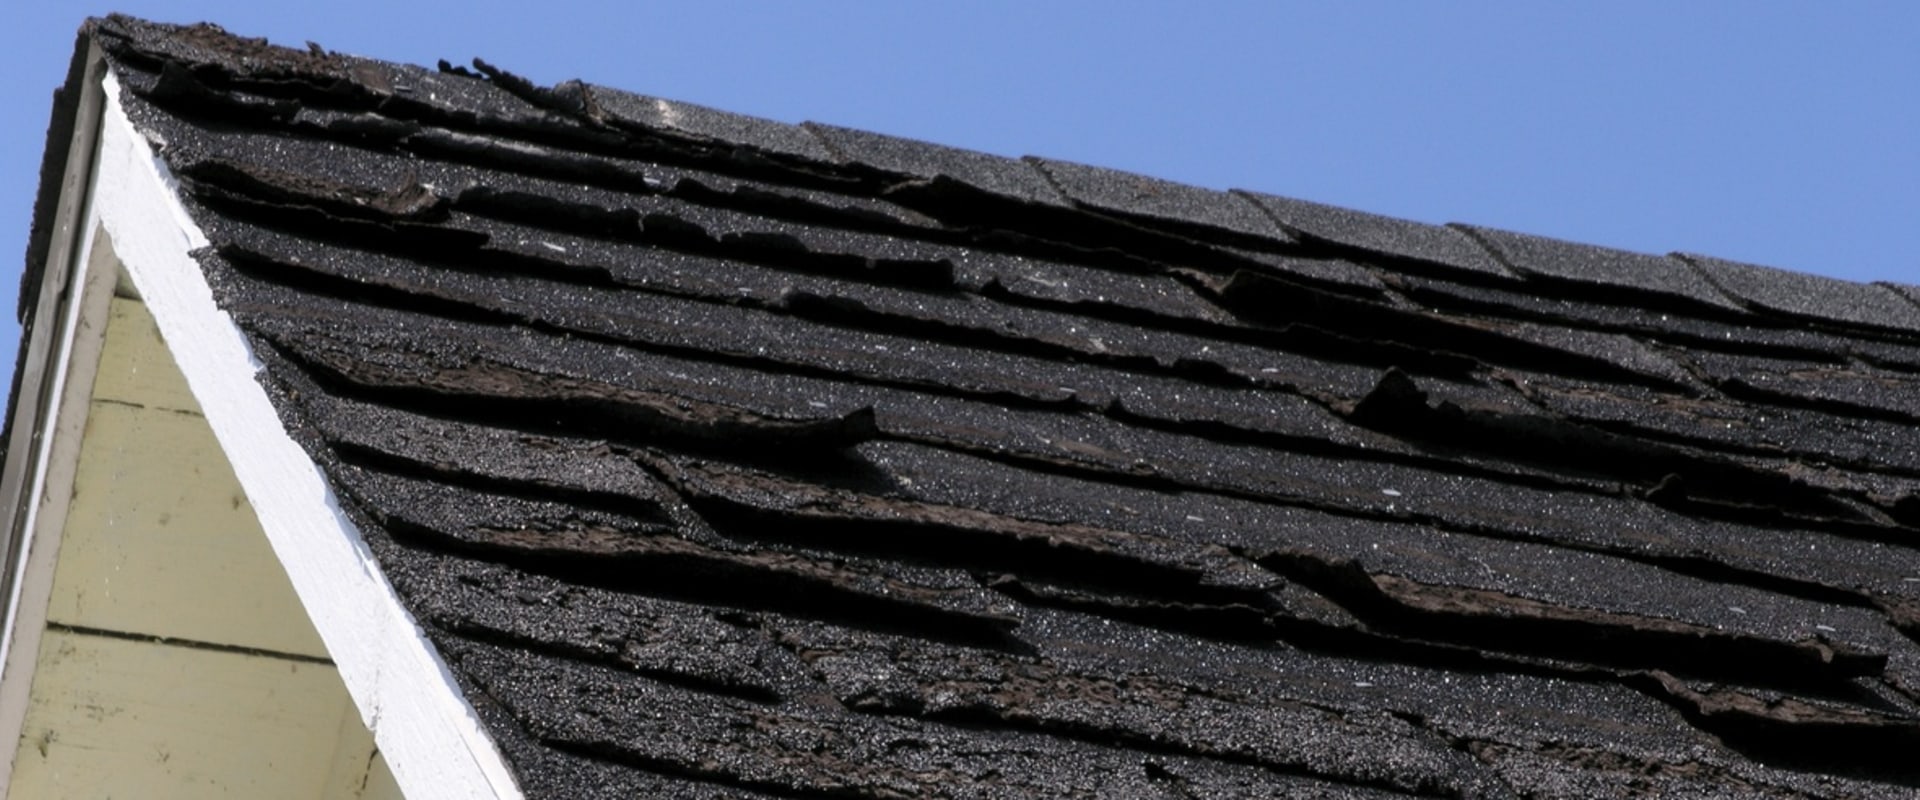 Can roofing paper get wet?